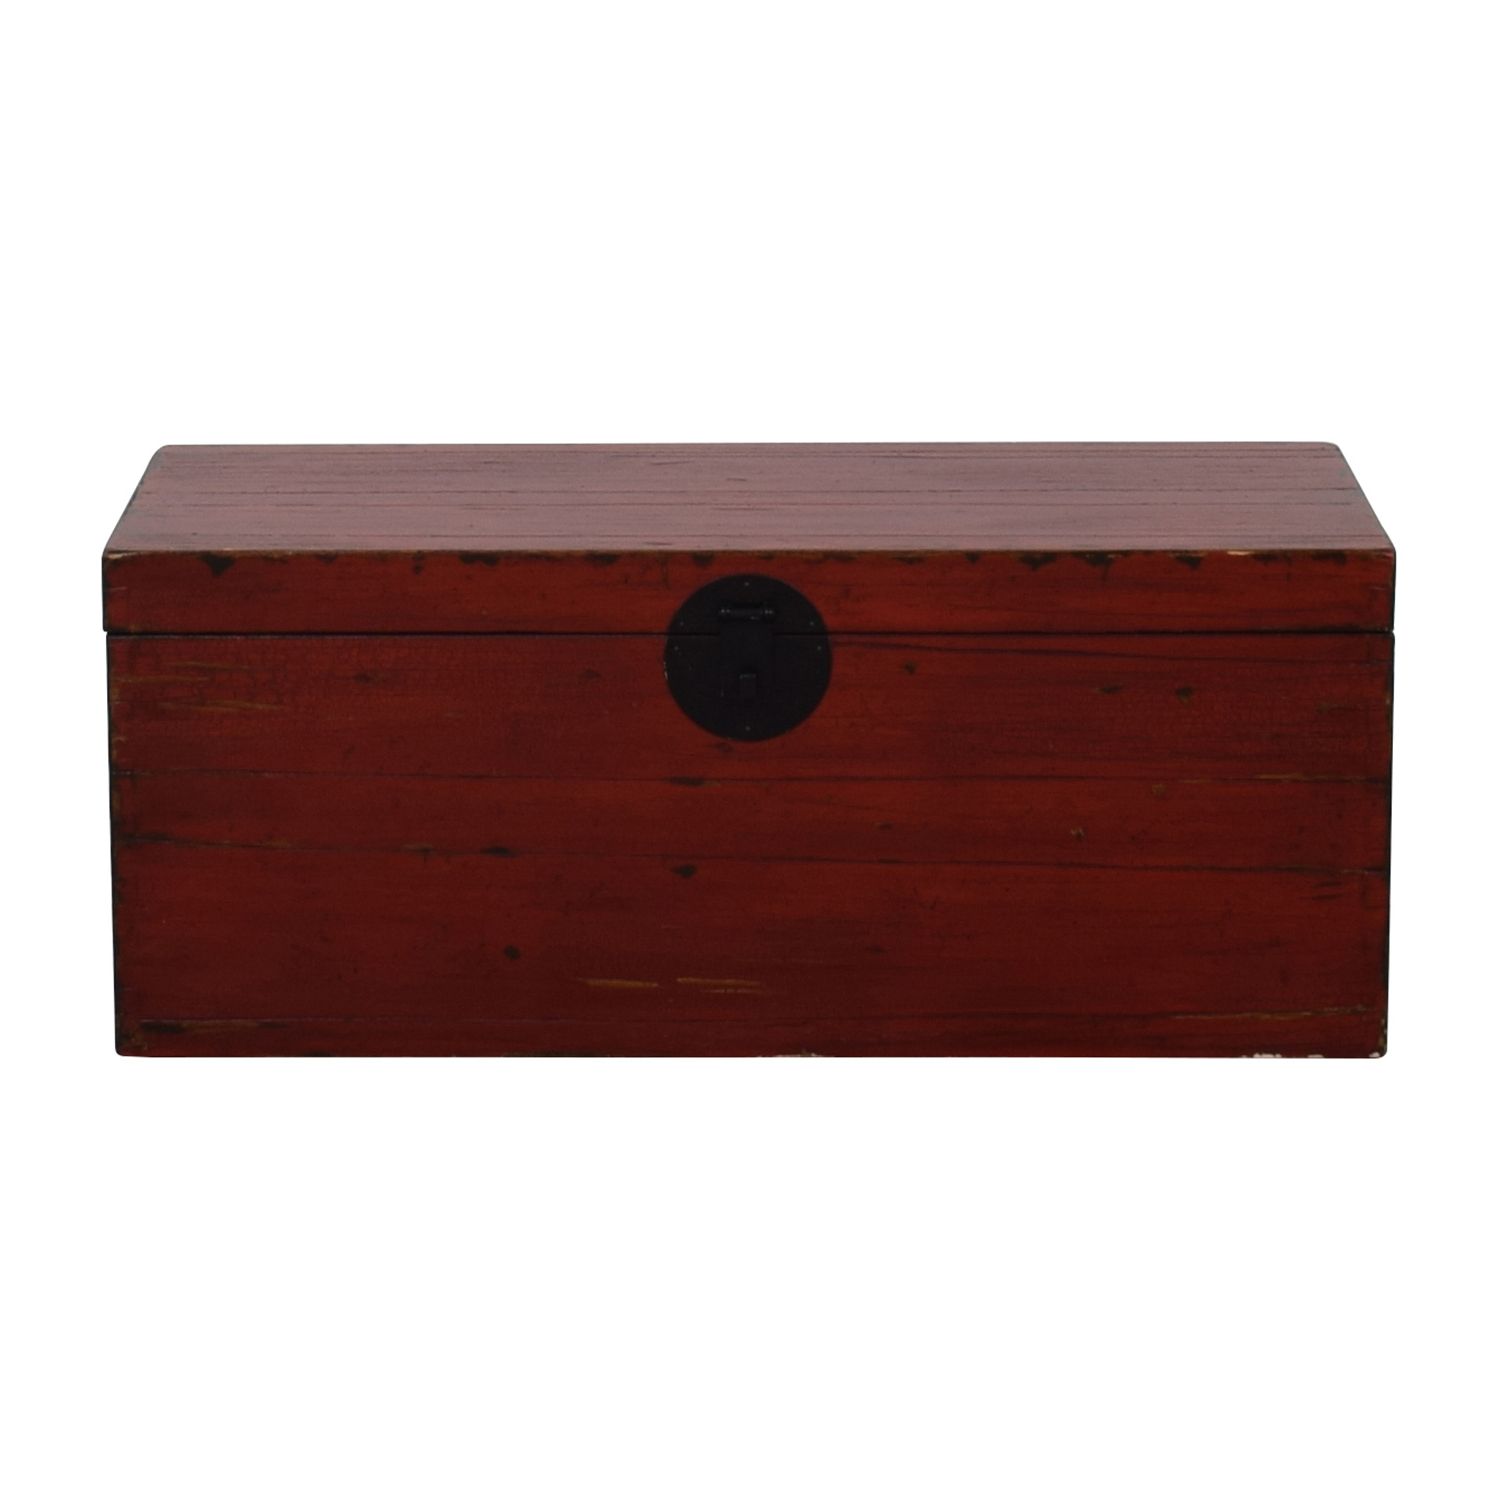 [%66% Off – Asian Style Red Rustic Trunk / Storage Regarding Preferred Seven Seas Asian Sideboards|seven Seas Asian Sideboards Pertaining To Famous 66% Off – Asian Style Red Rustic Trunk / Storage|2019 Seven Seas Asian Sideboards In 66% Off – Asian Style Red Rustic Trunk / Storage|trendy 66% Off – Asian Style Red Rustic Trunk / Storage Within Seven Seas Asian Sideboards%] (View 3 of 20)